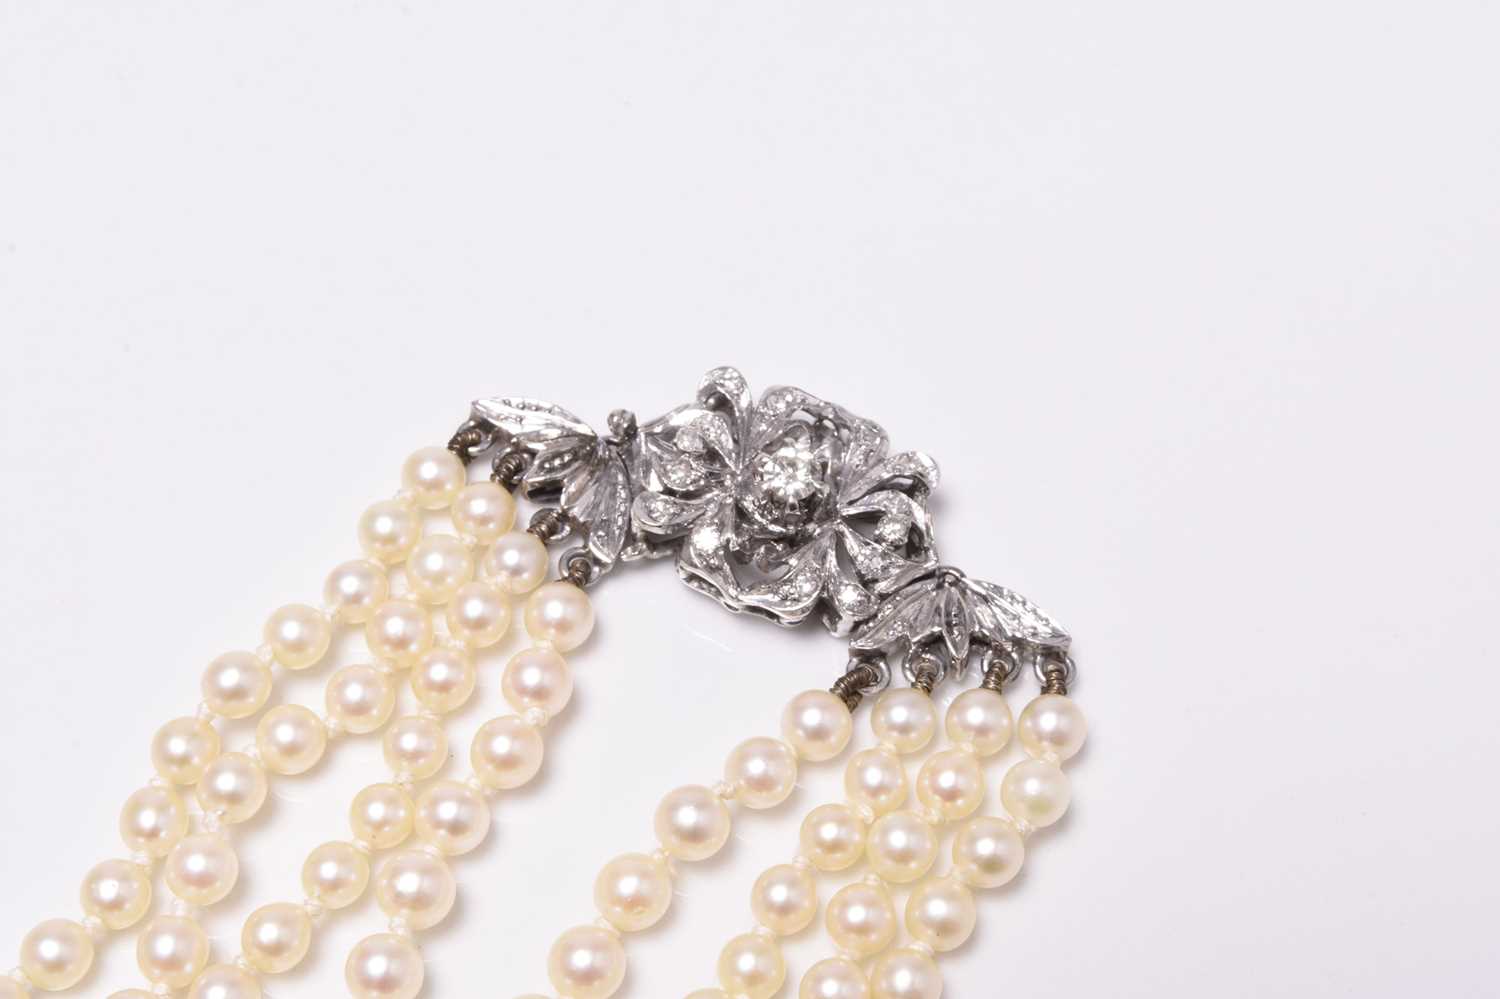 A four strand graduated cultured pearl necklace with 18ct white gold diamond set clasp - Image 2 of 16